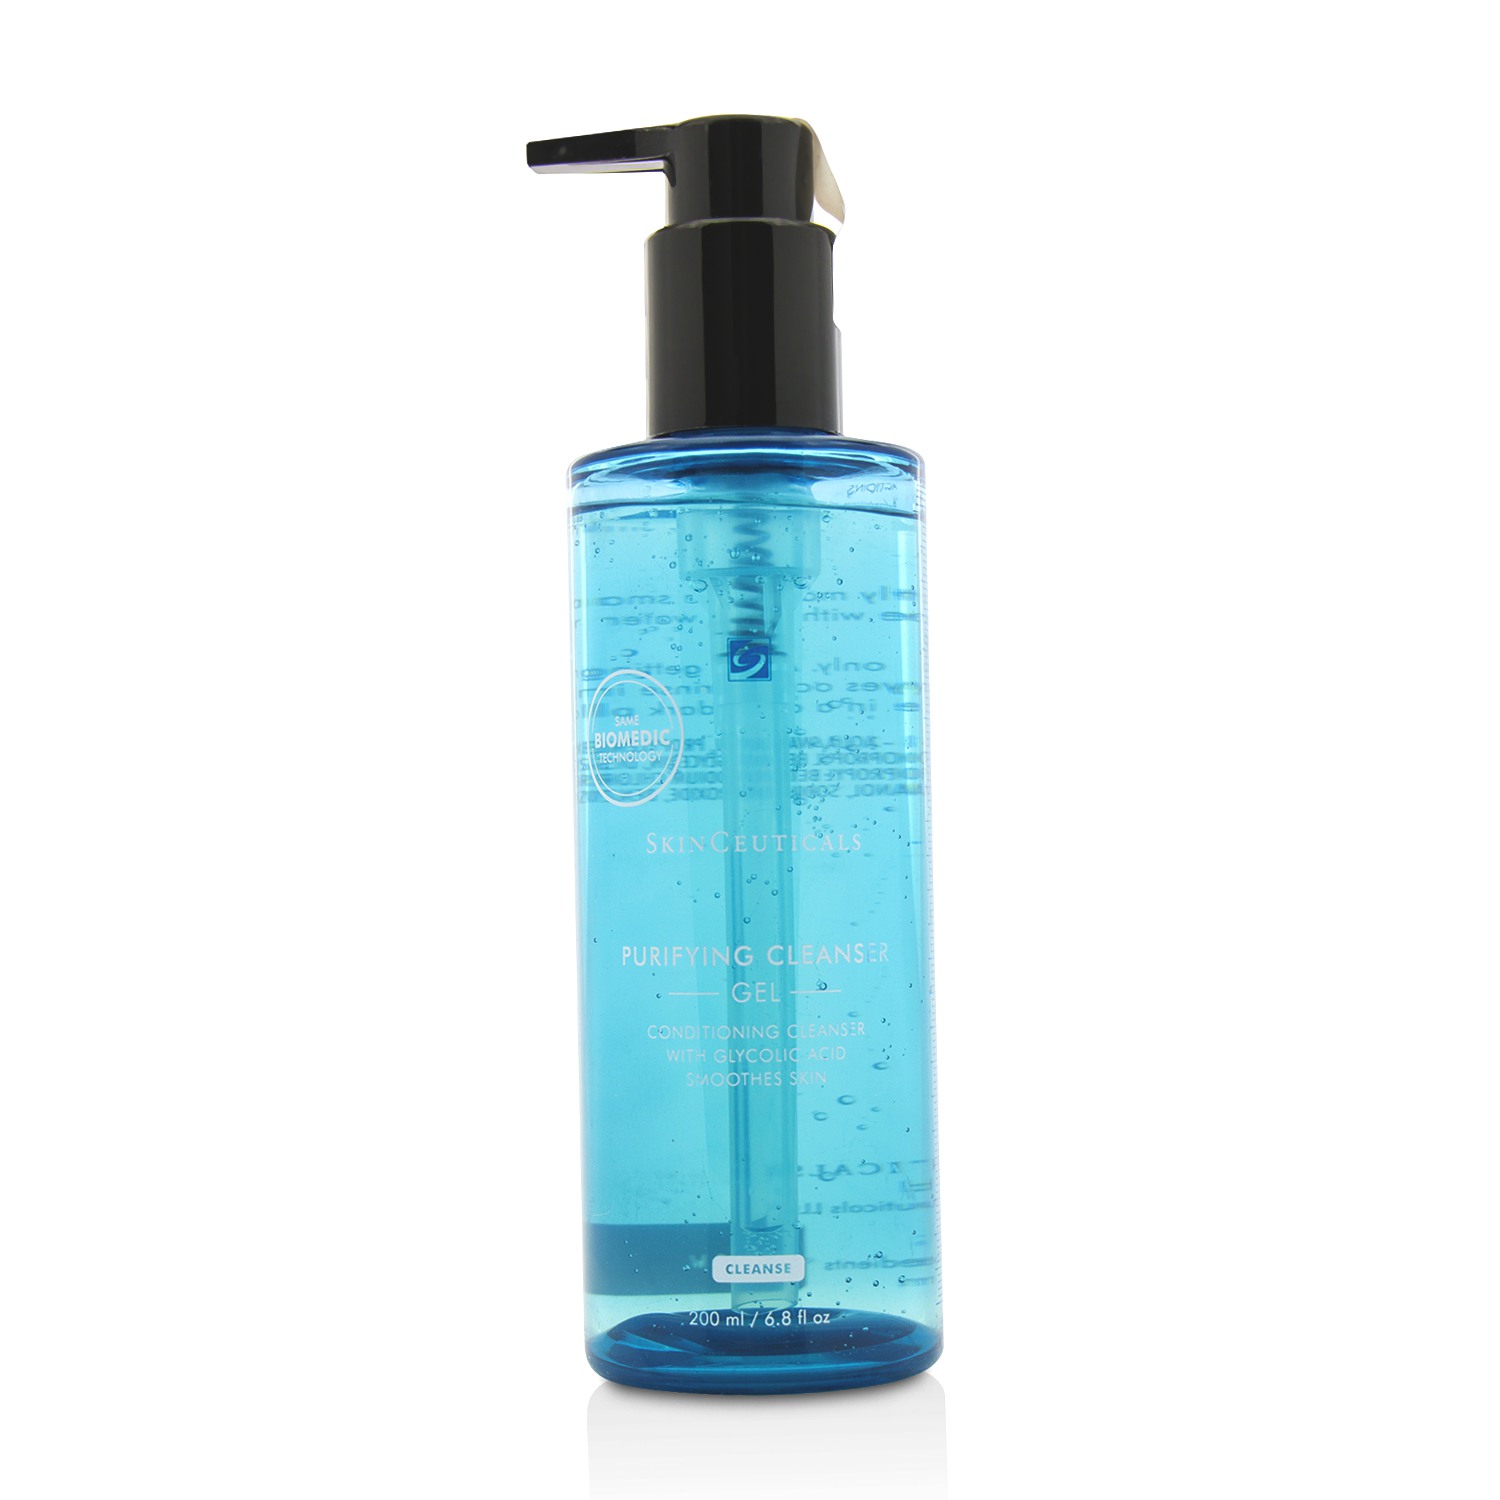 Purifying Cleanser Gel Skin Ceuticals Image